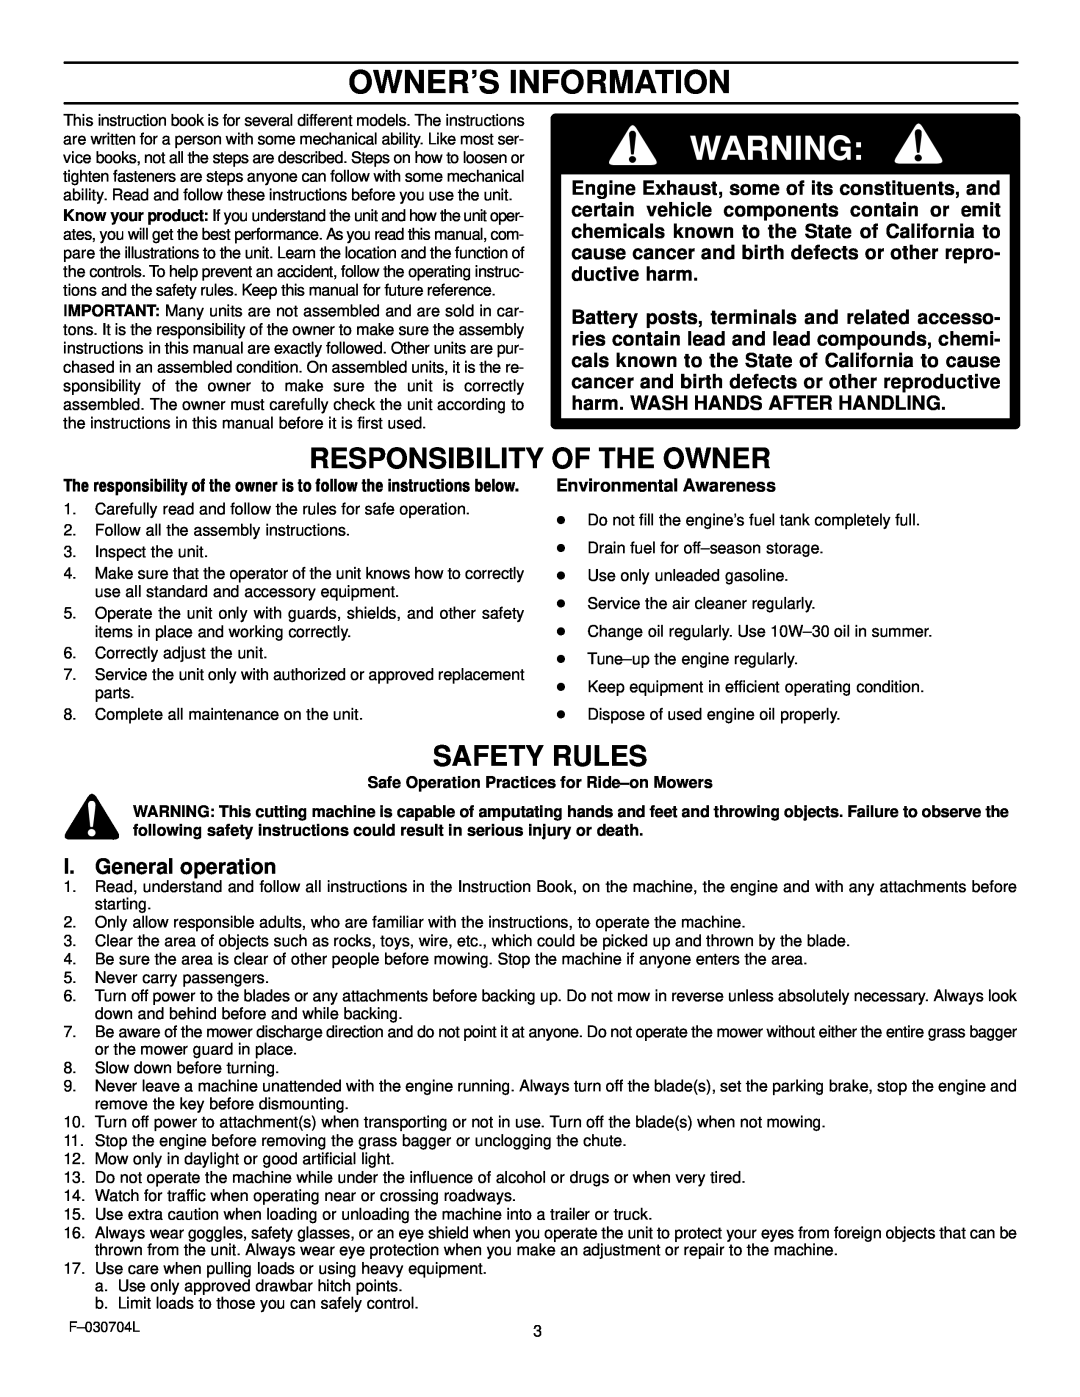 Murray 425303x92B manual Owner’S Information, Responsibility Of The Owner, Safety Rules, I. General operation 